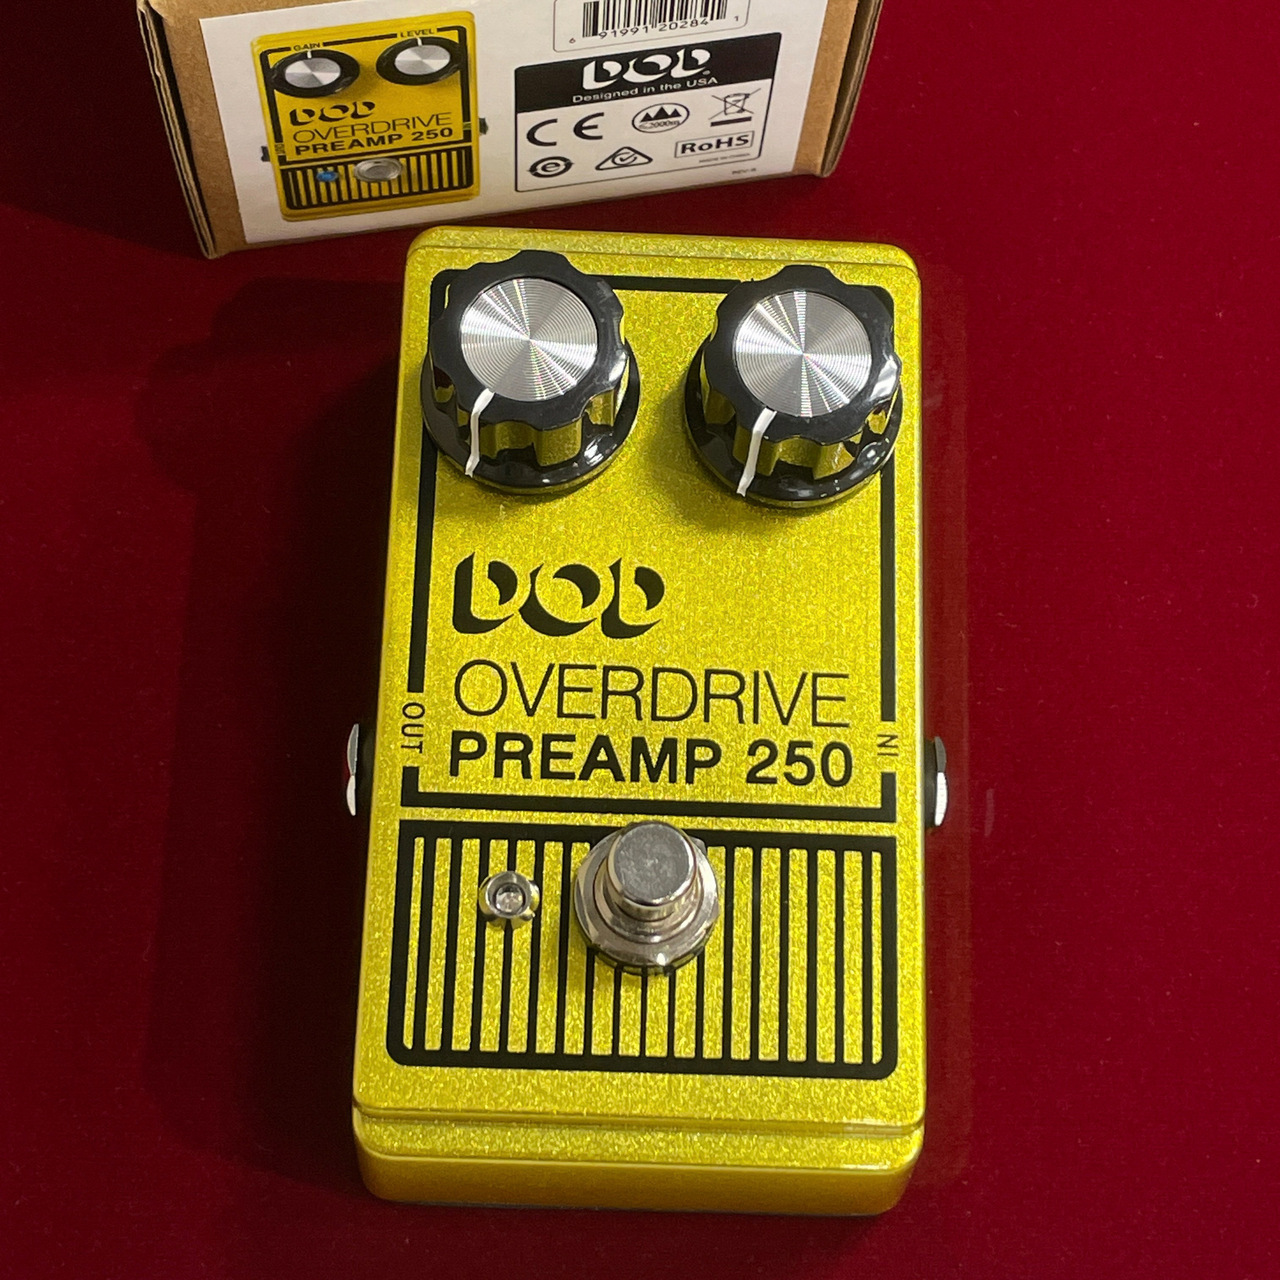 DOD OVERDRIVE PREAMP 250